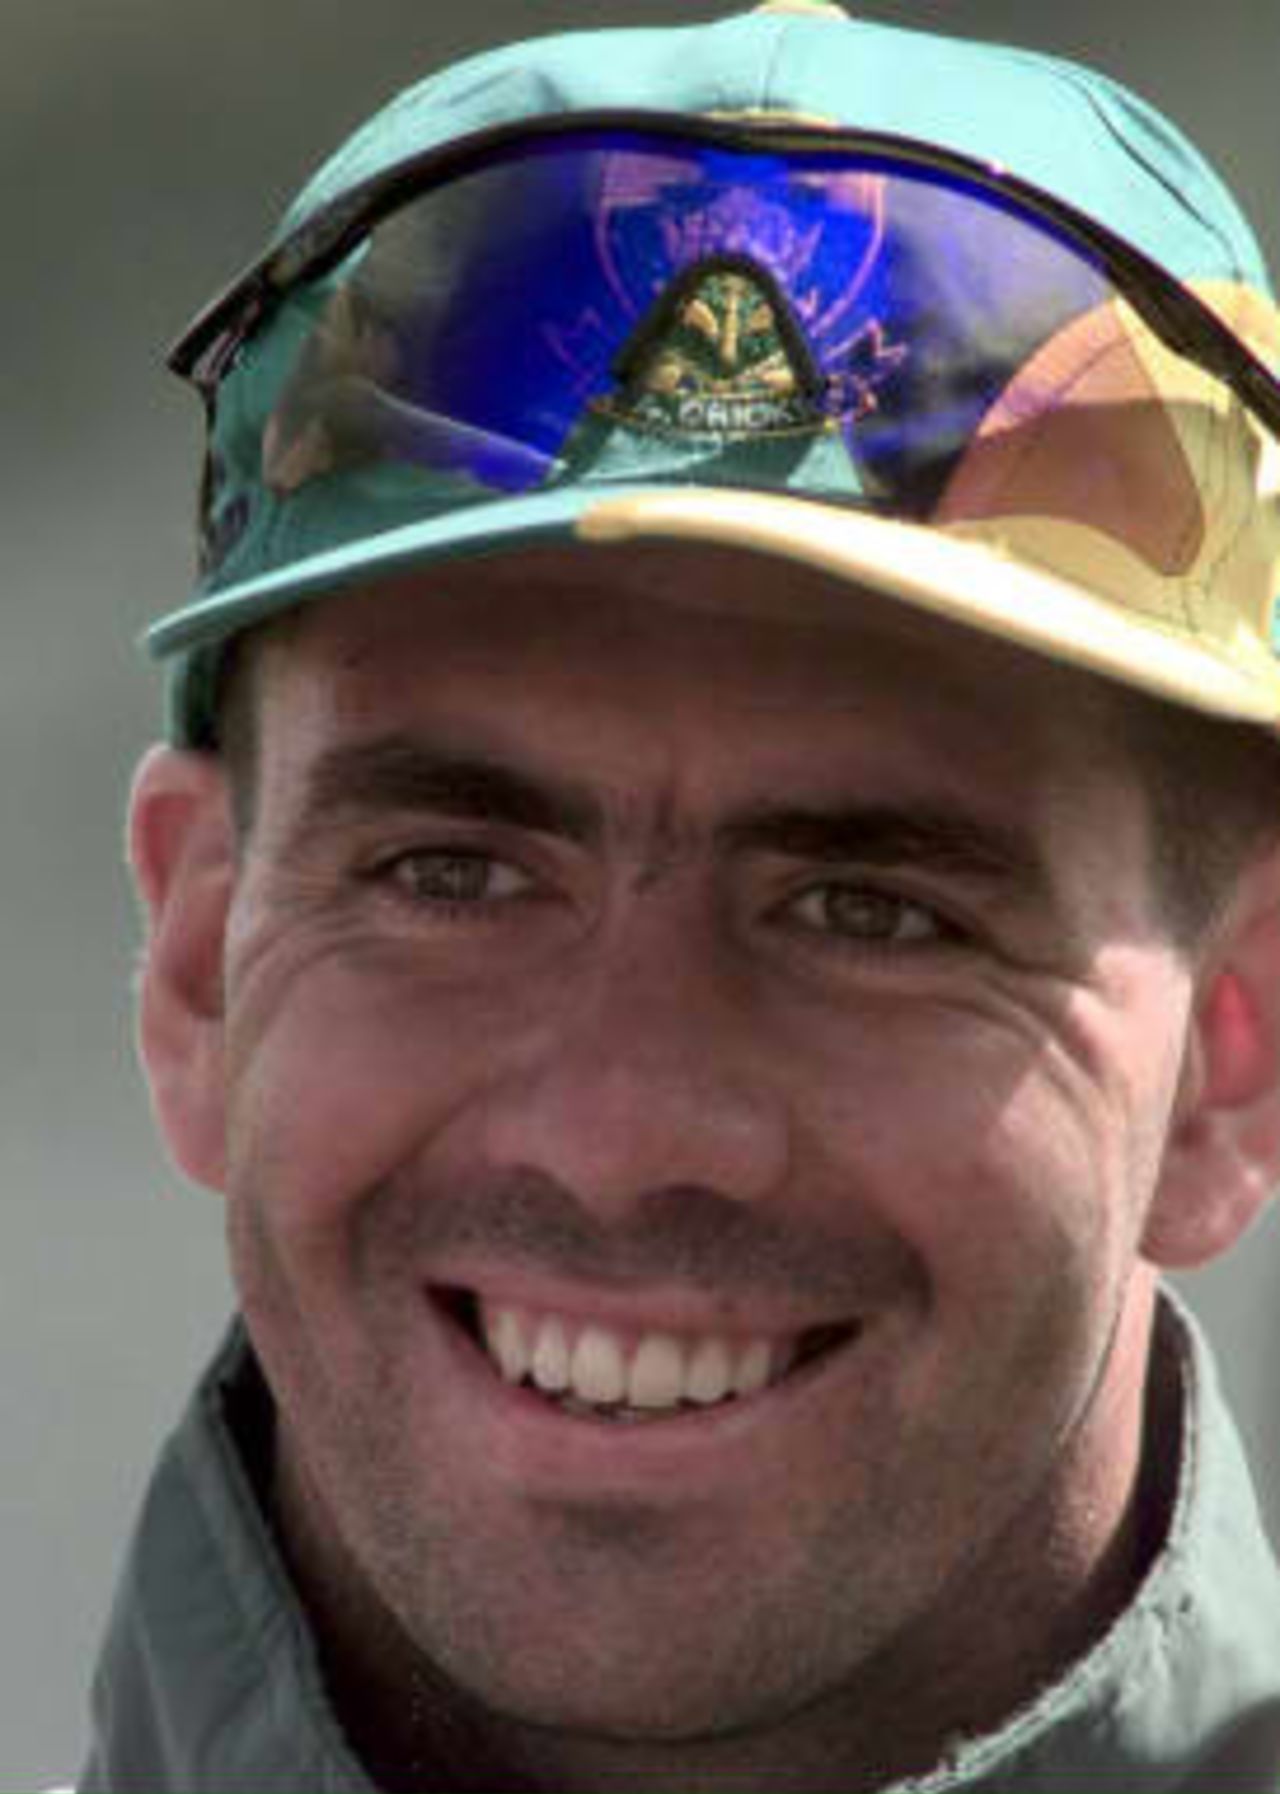 South African captain Hansie Cronje smiles in the nets at Edgbaston in Birmingham, 16 June 1999, ahead of his team's Cricket World Cup semi-final clash against Australia 17 June.